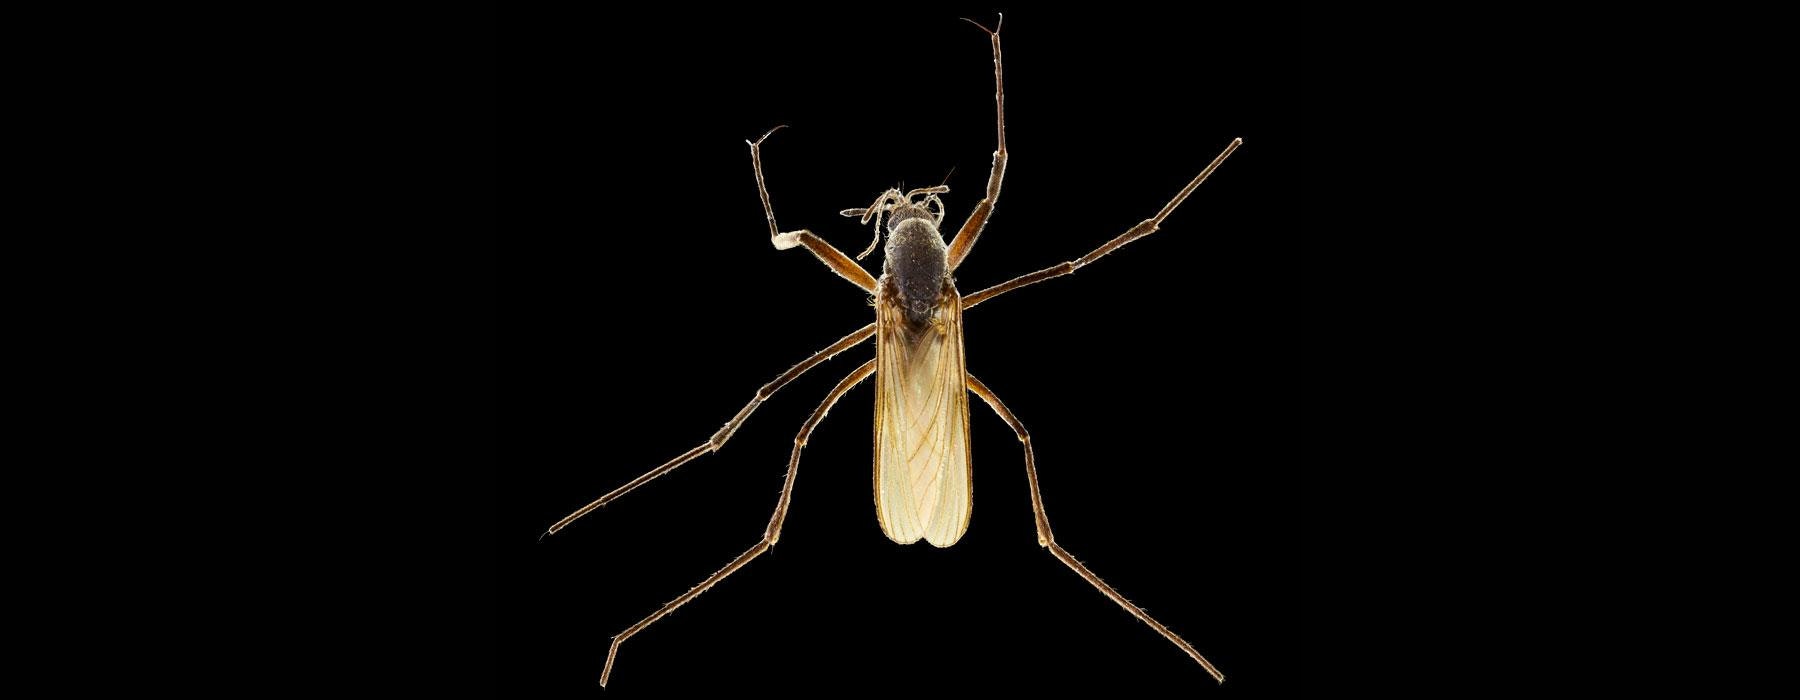 Photograph of a mosquito